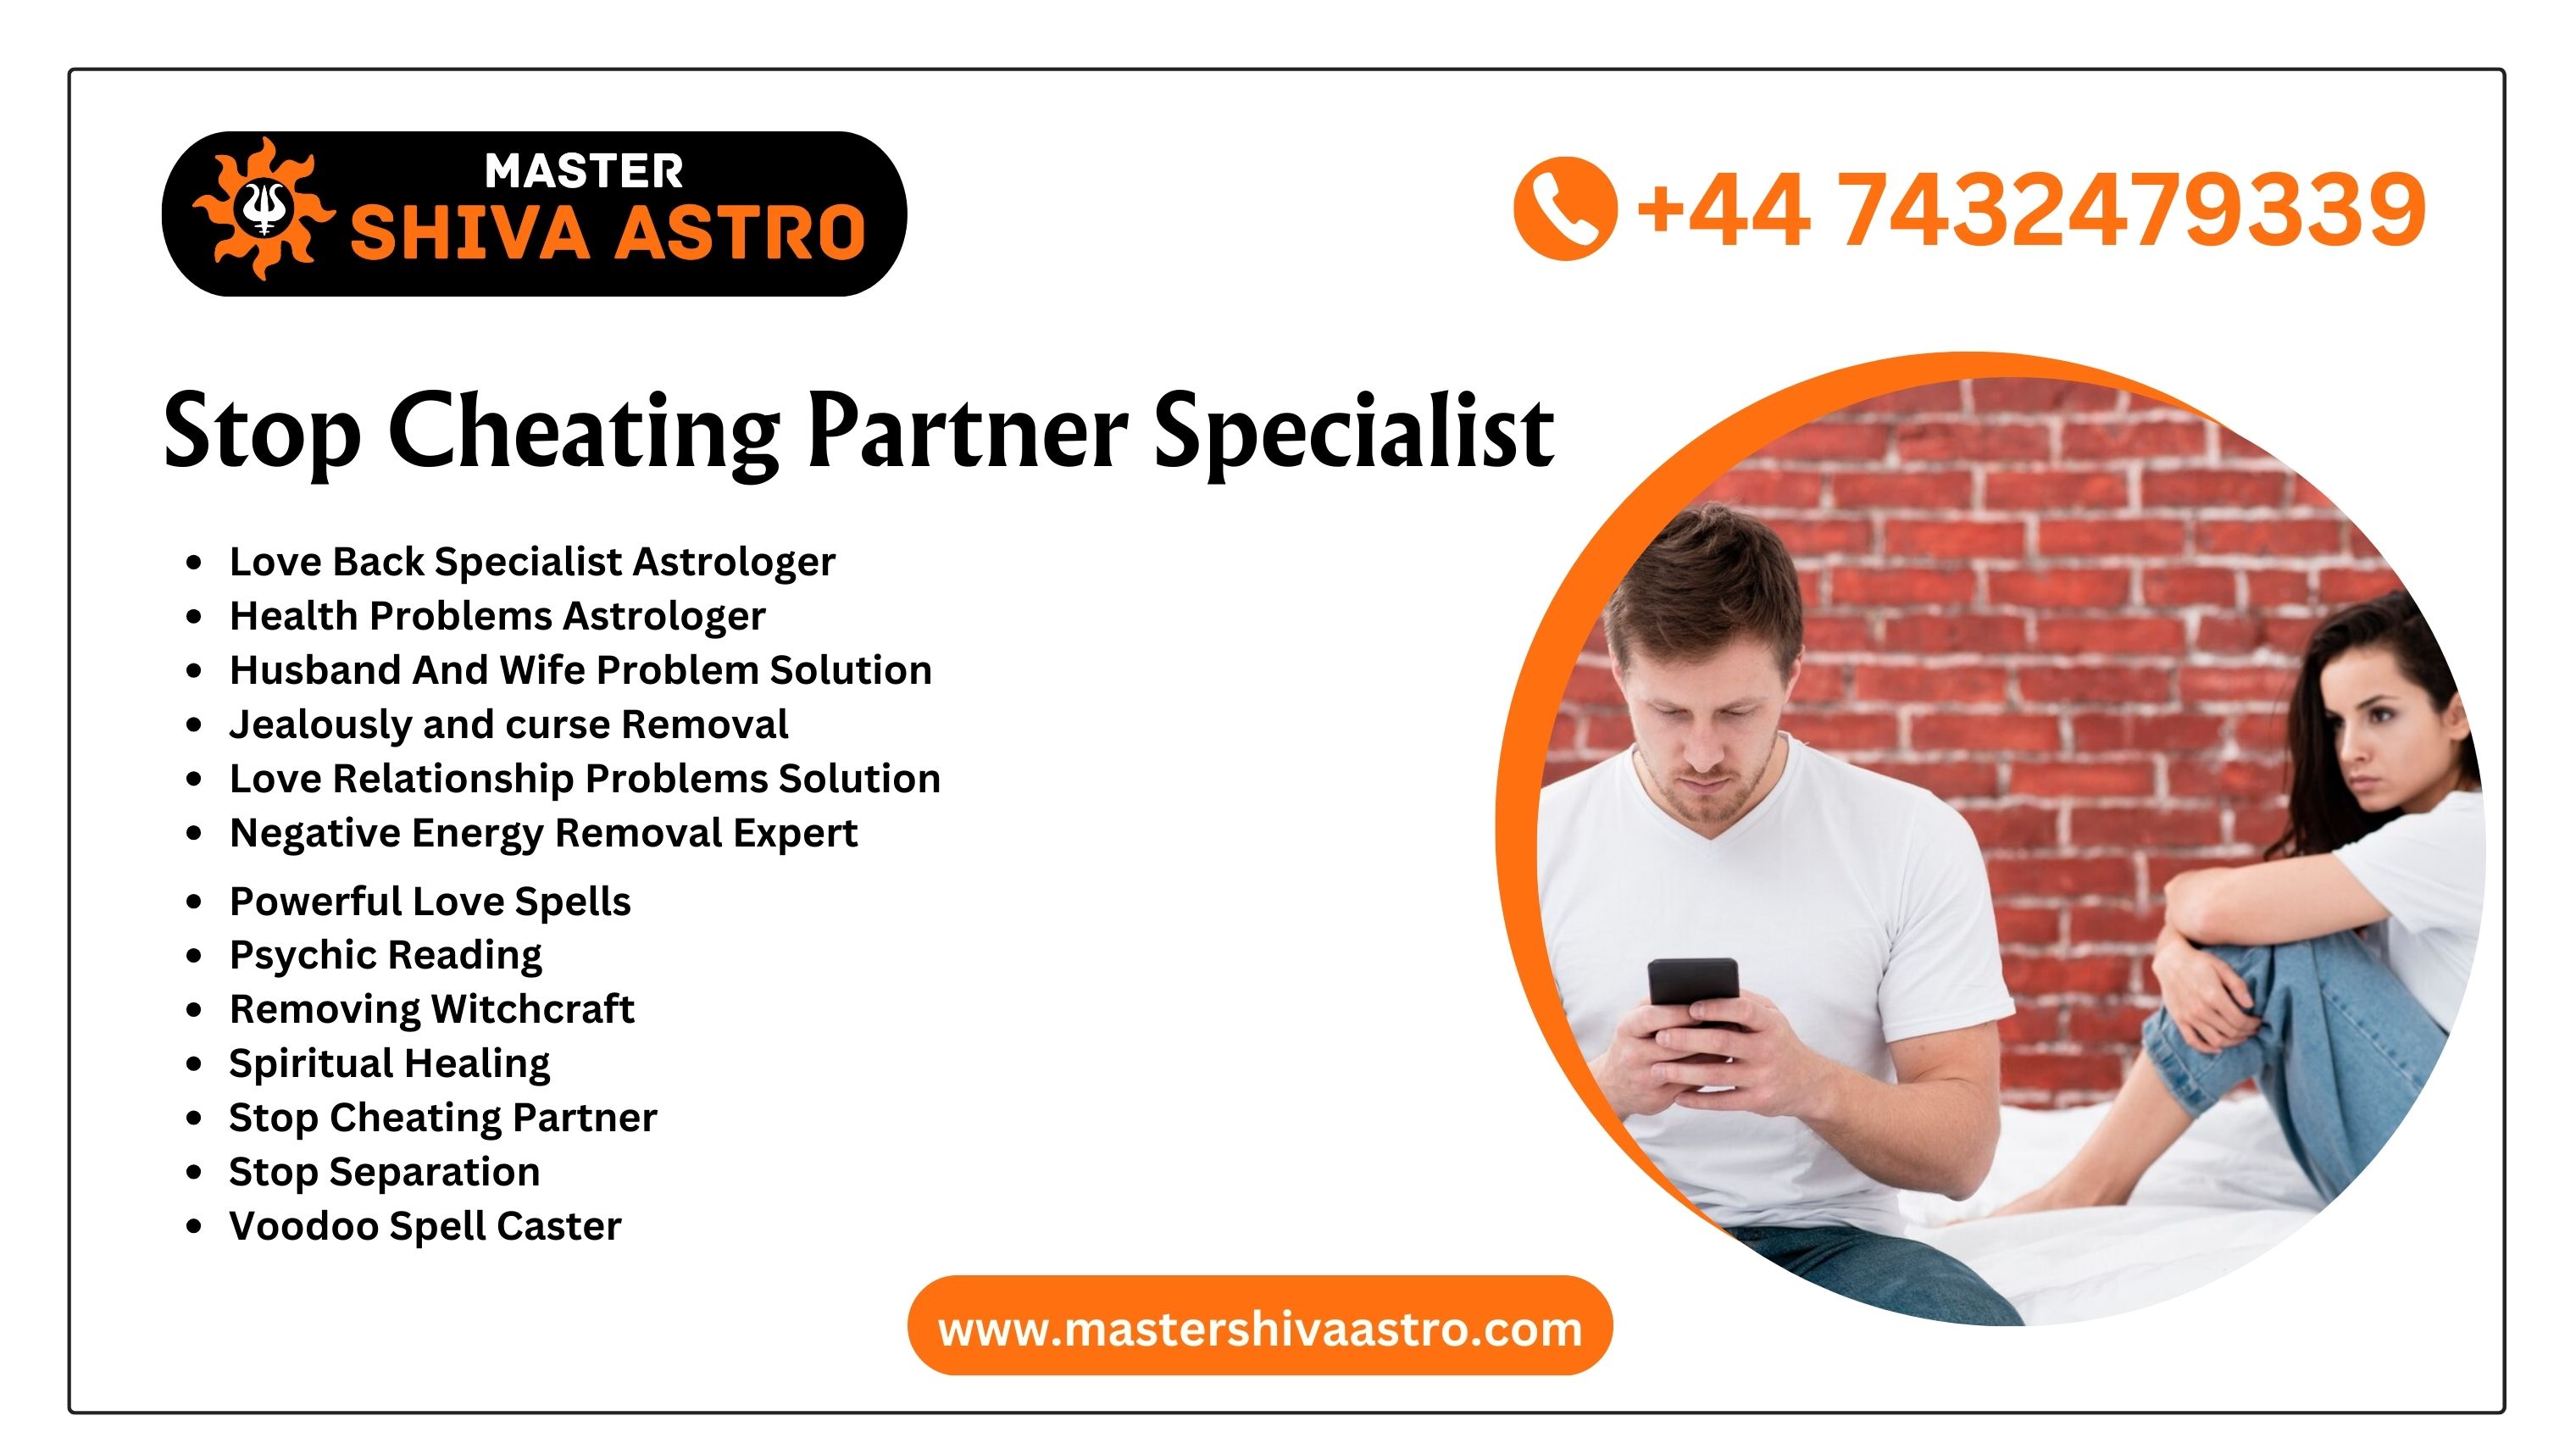 Stop Cheating Partner Specialist